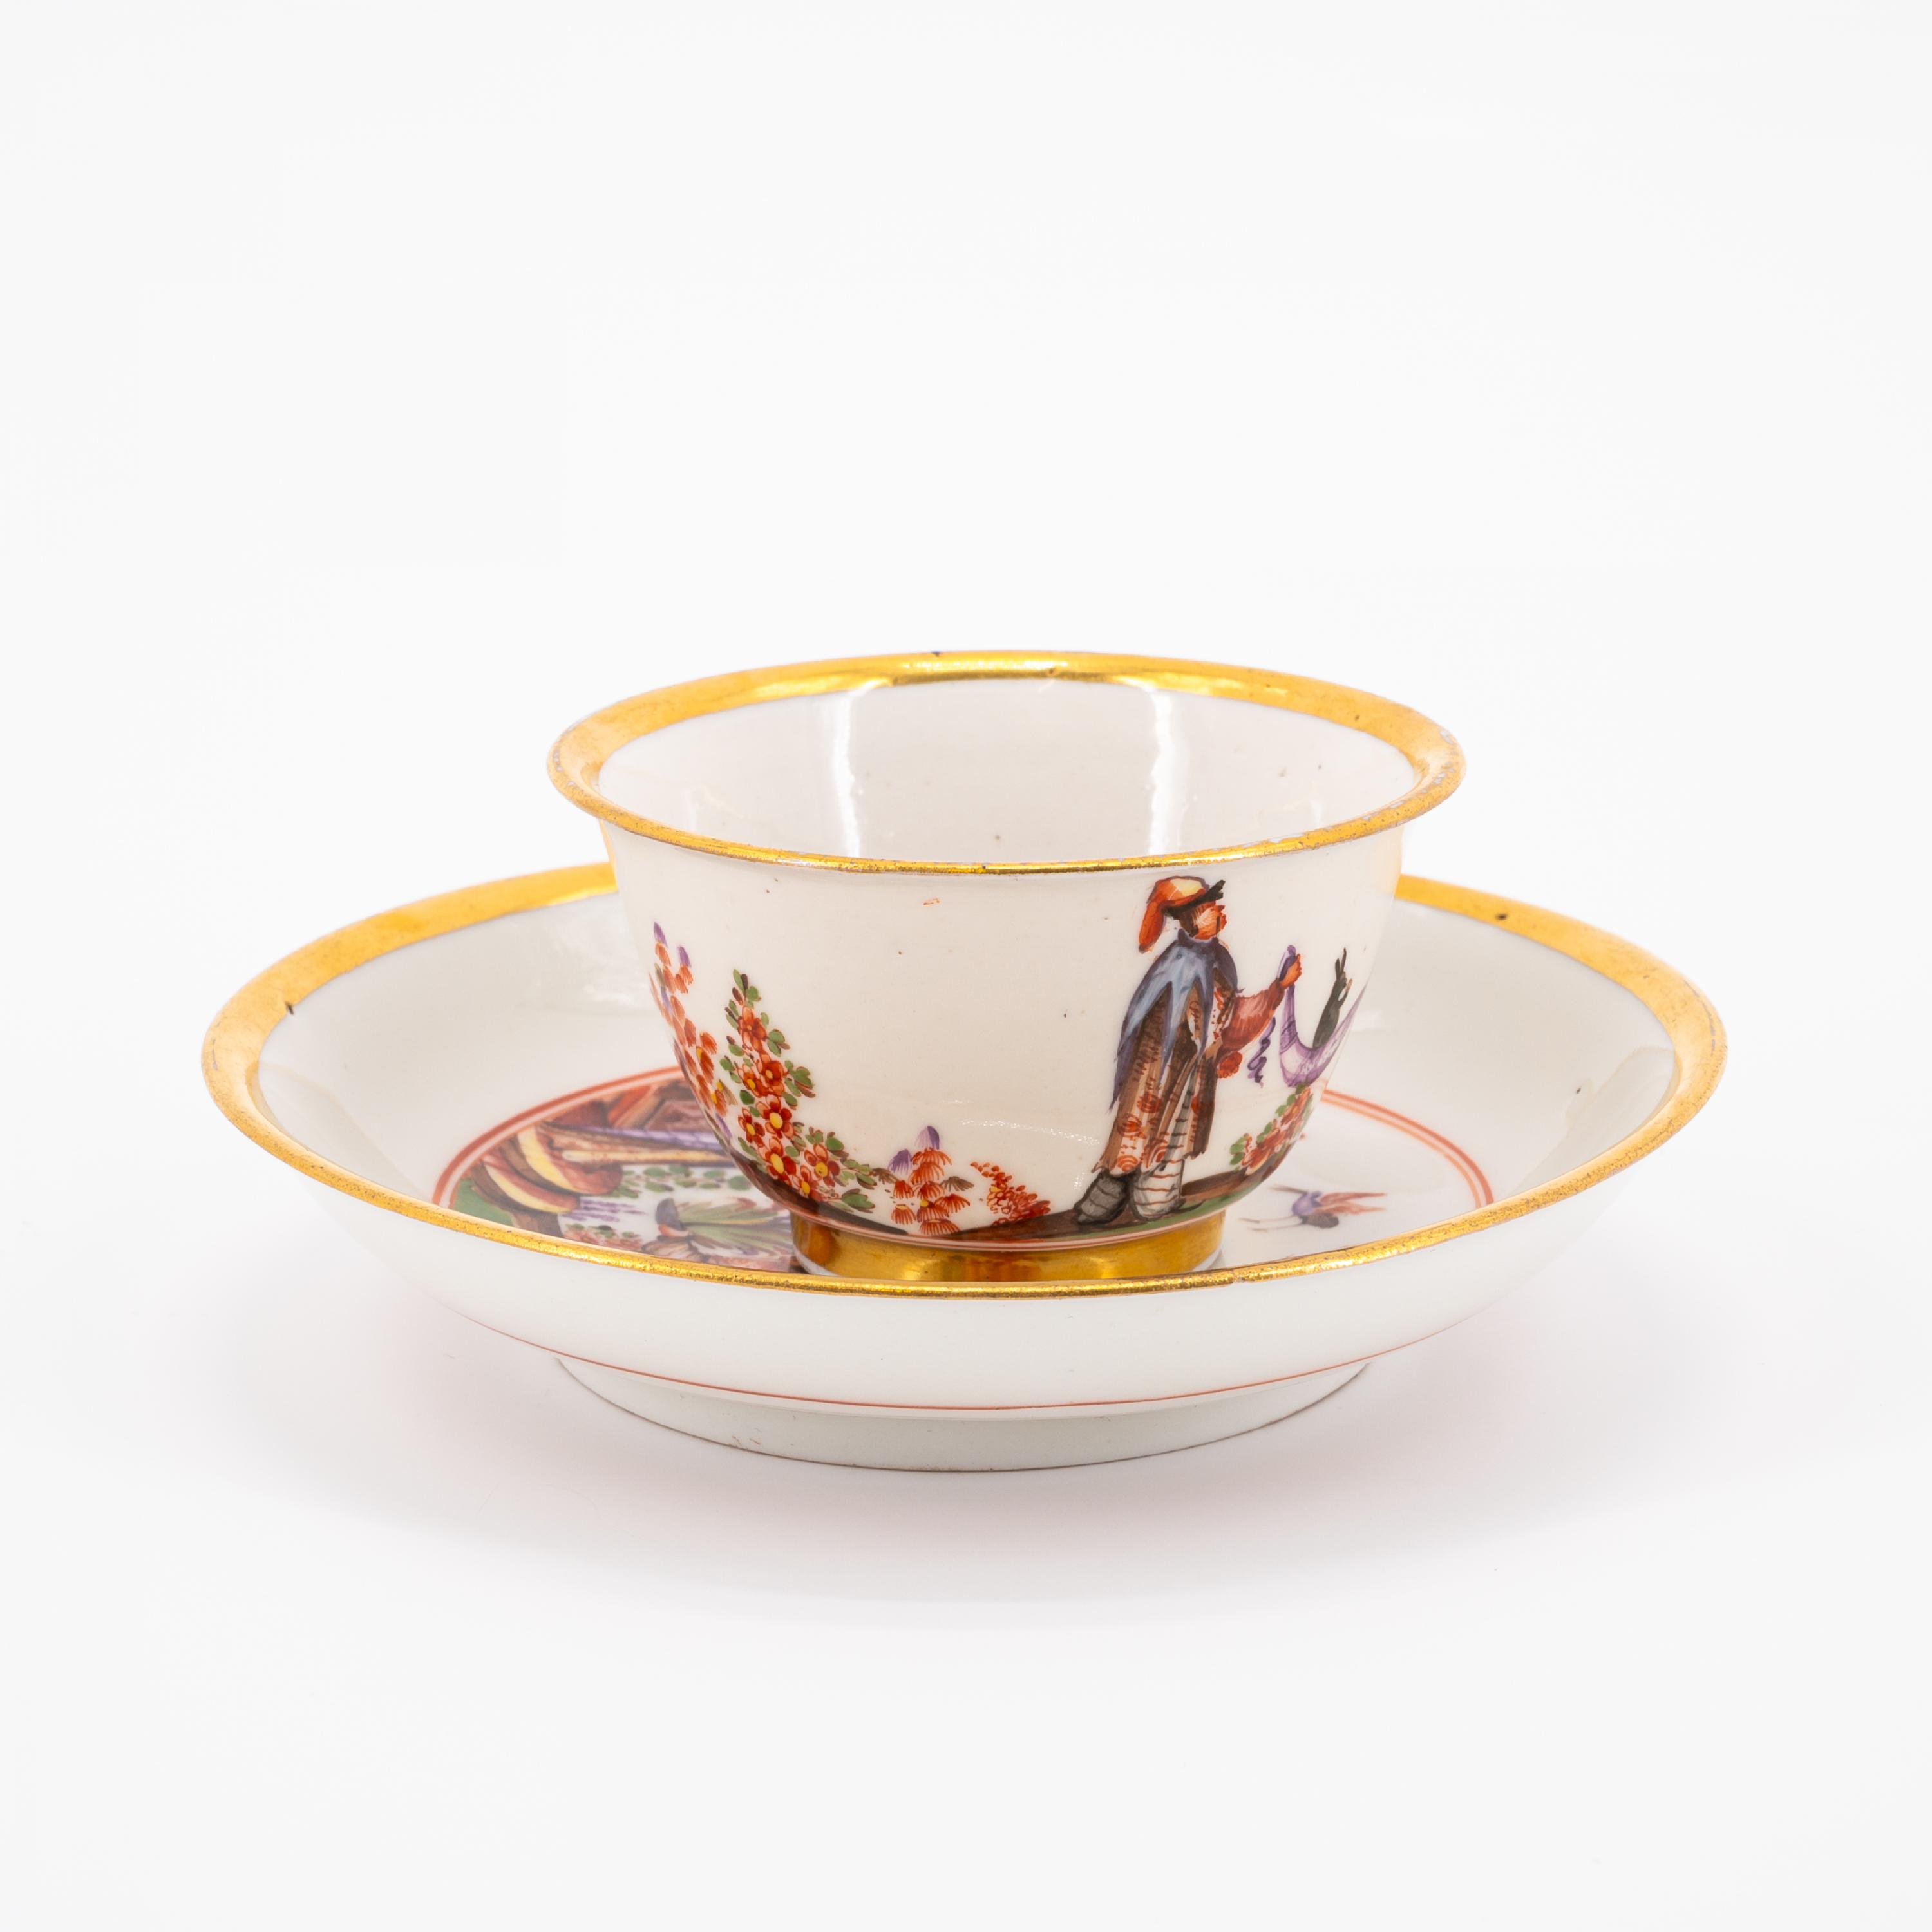 PORCELAIN TEA BOWLS AND SAUCER WITH FINE CHINOISERIES - Image 2 of 7